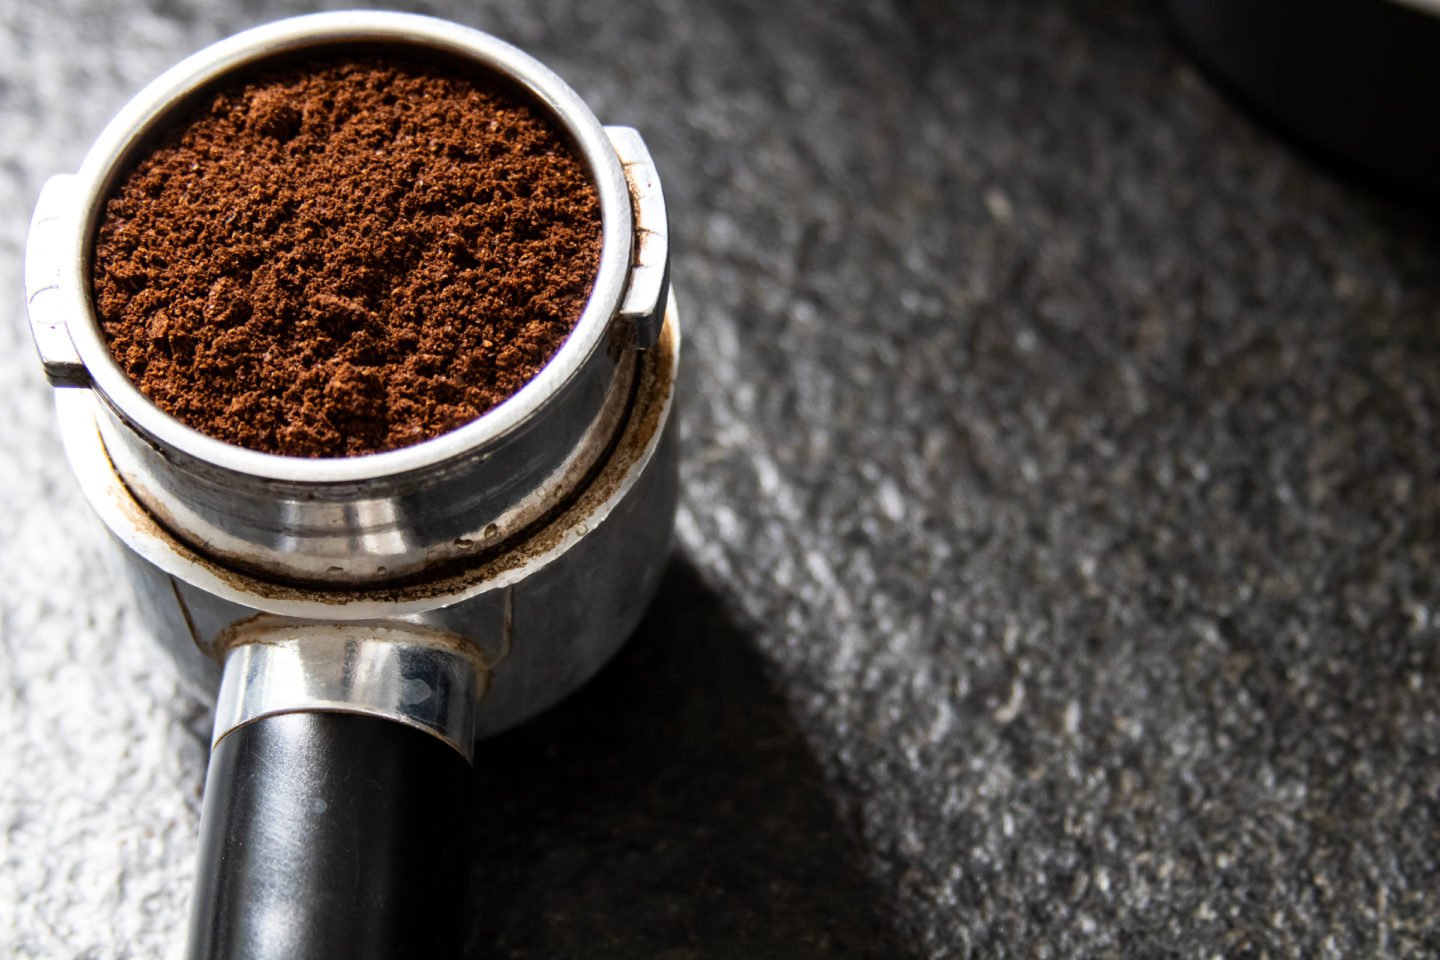 espresso powder can be used as cocoa powder substitute